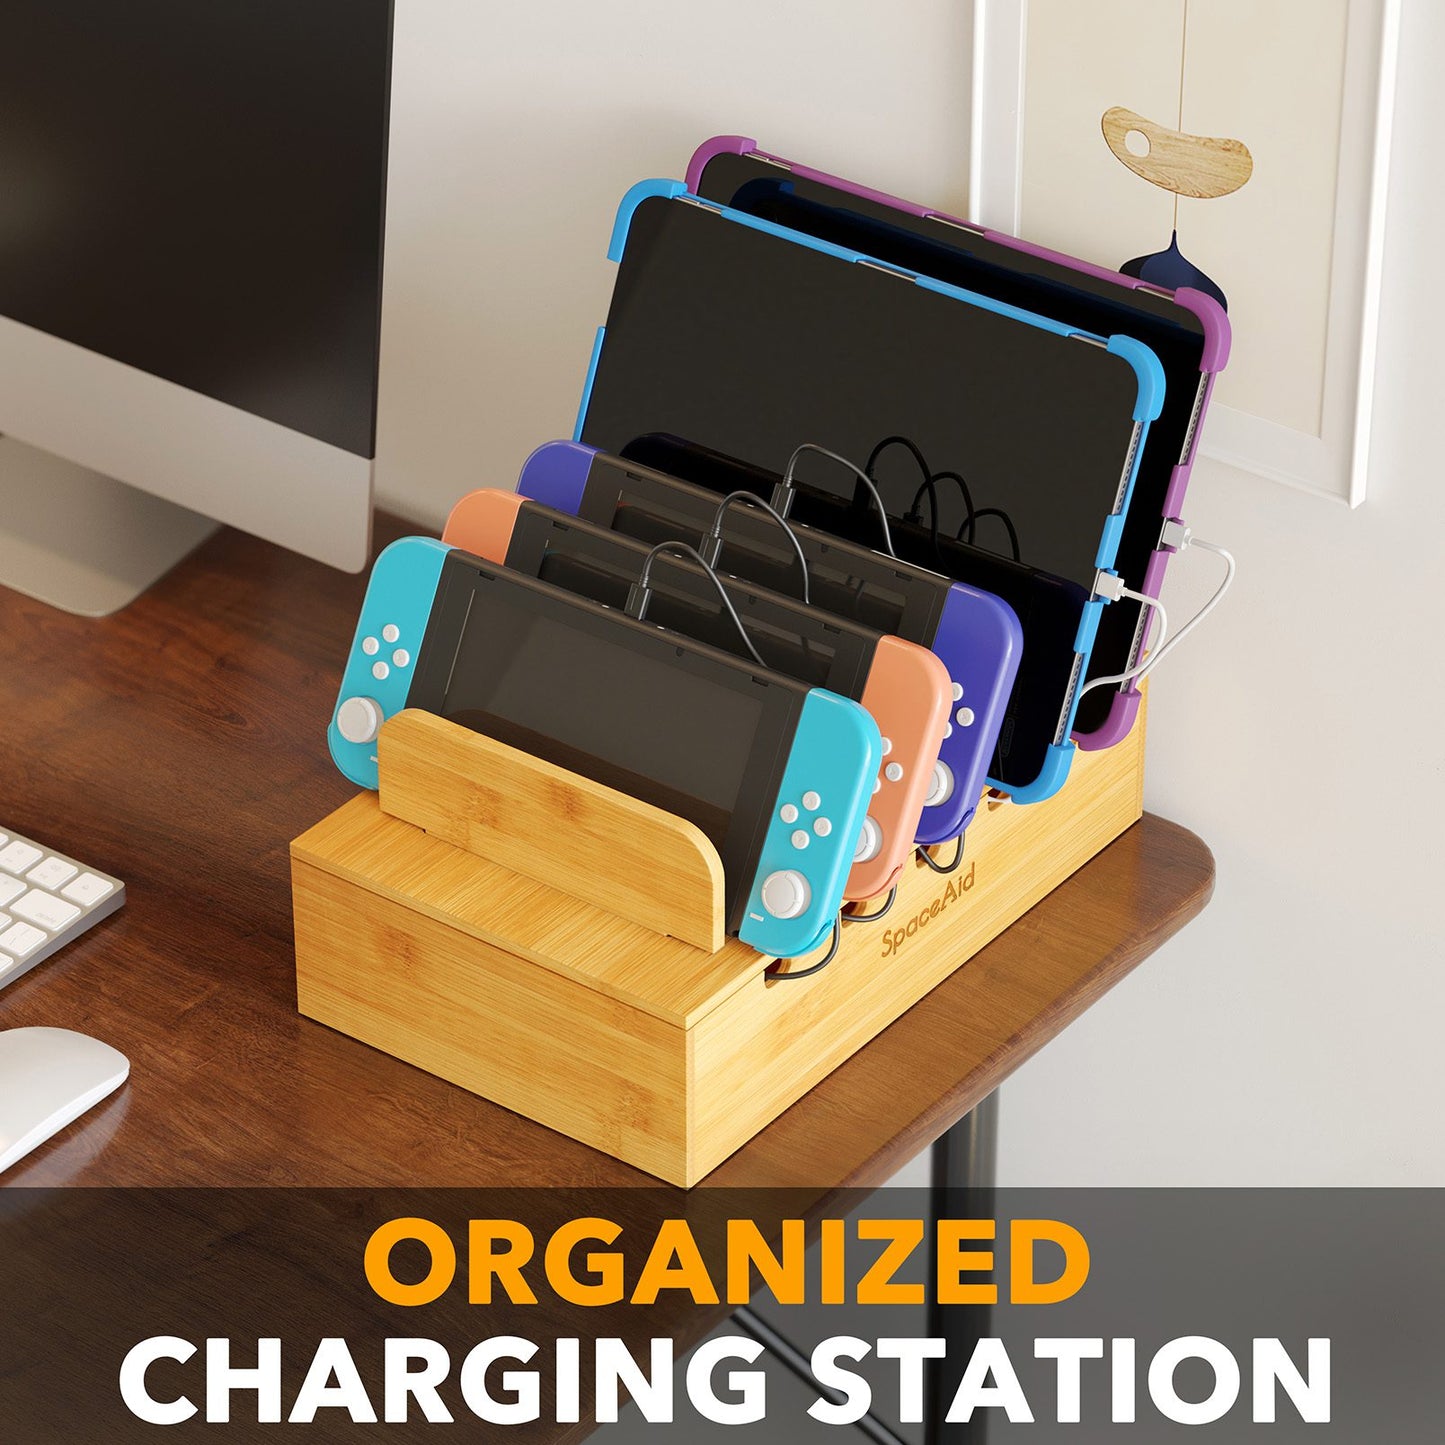 SpaceAid bamboo charging station organizer